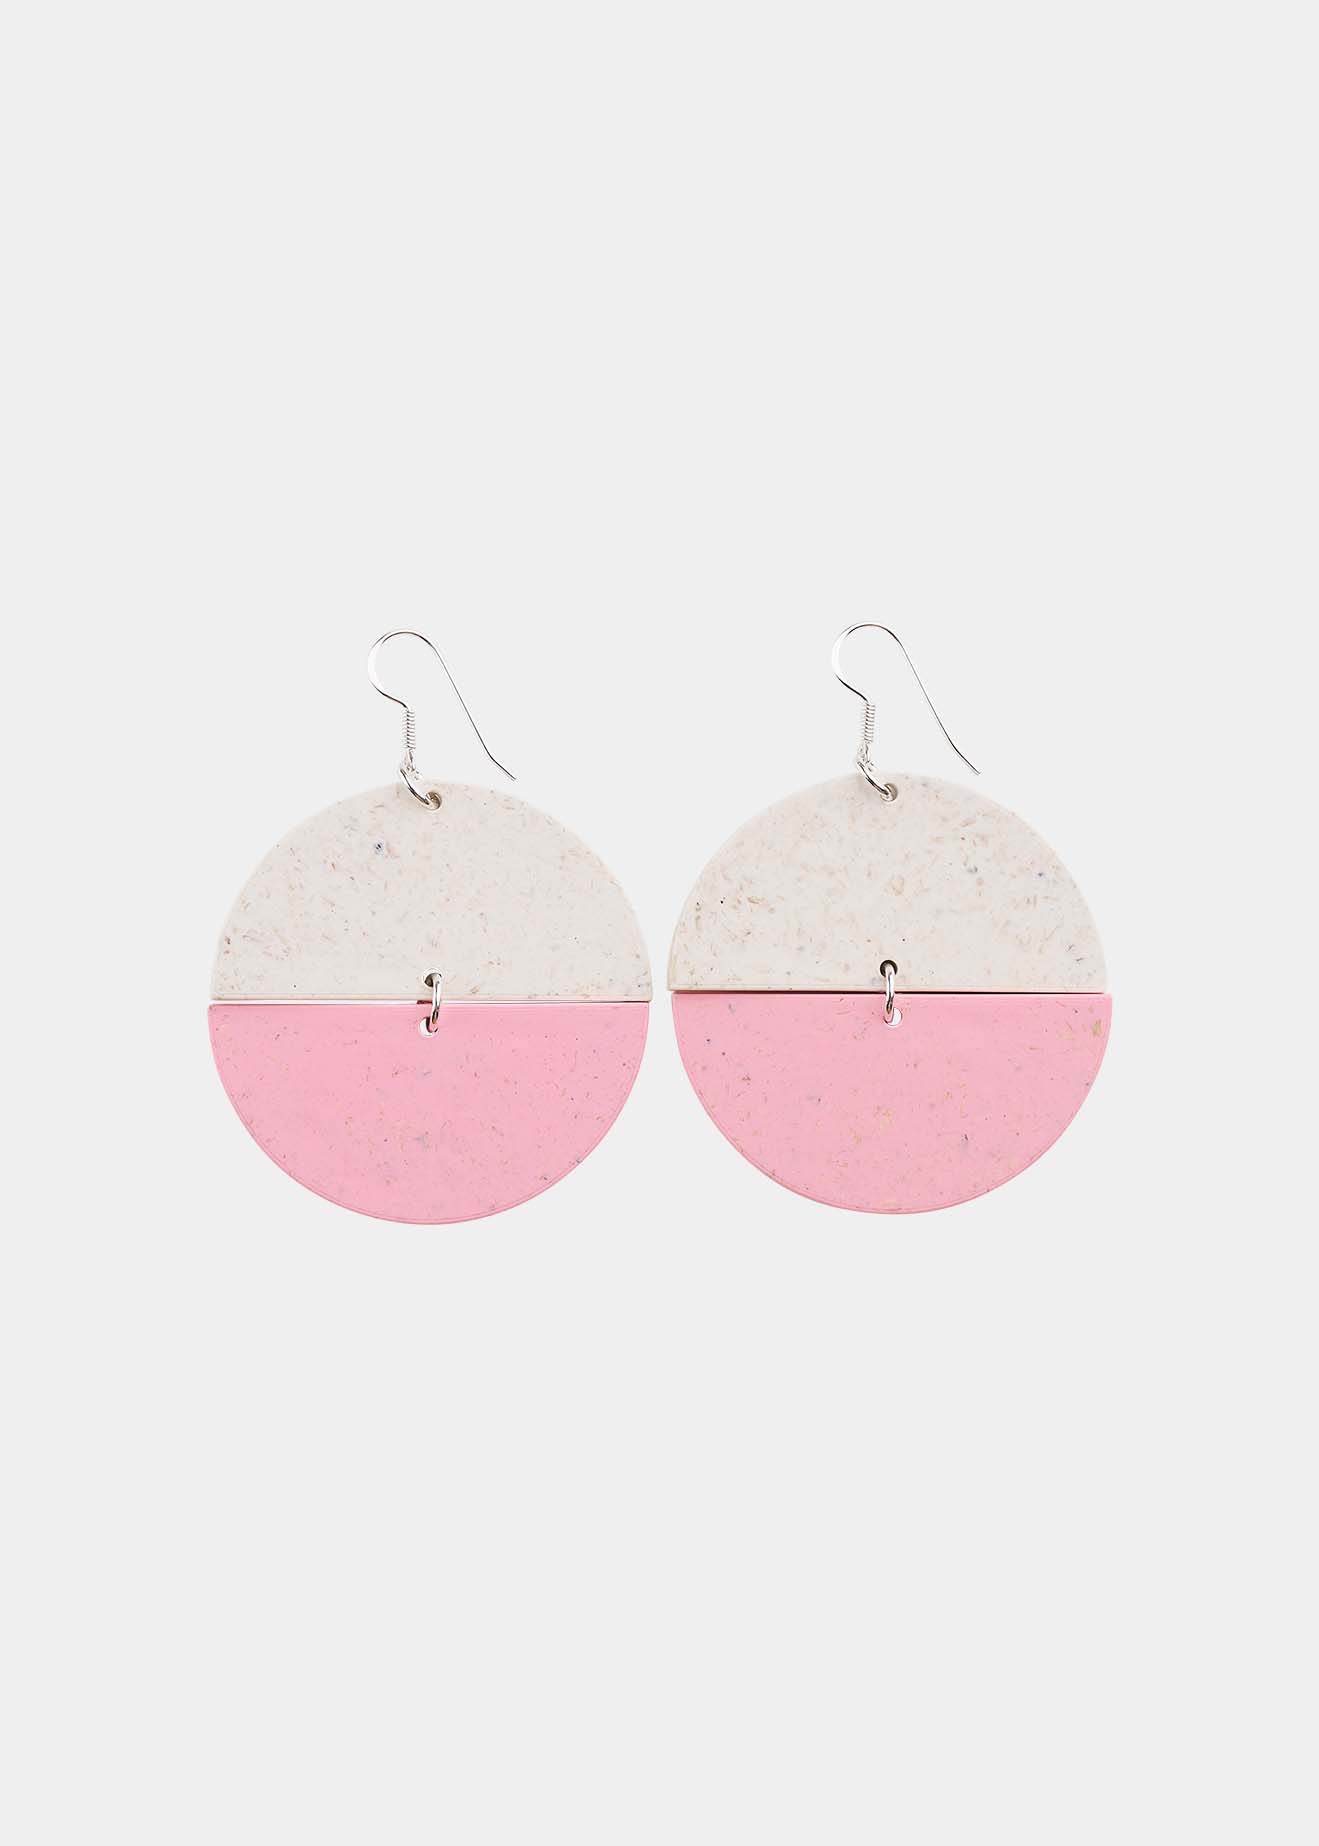 BEANS EARRINGS No.2, First Snow/Cherry Blossom